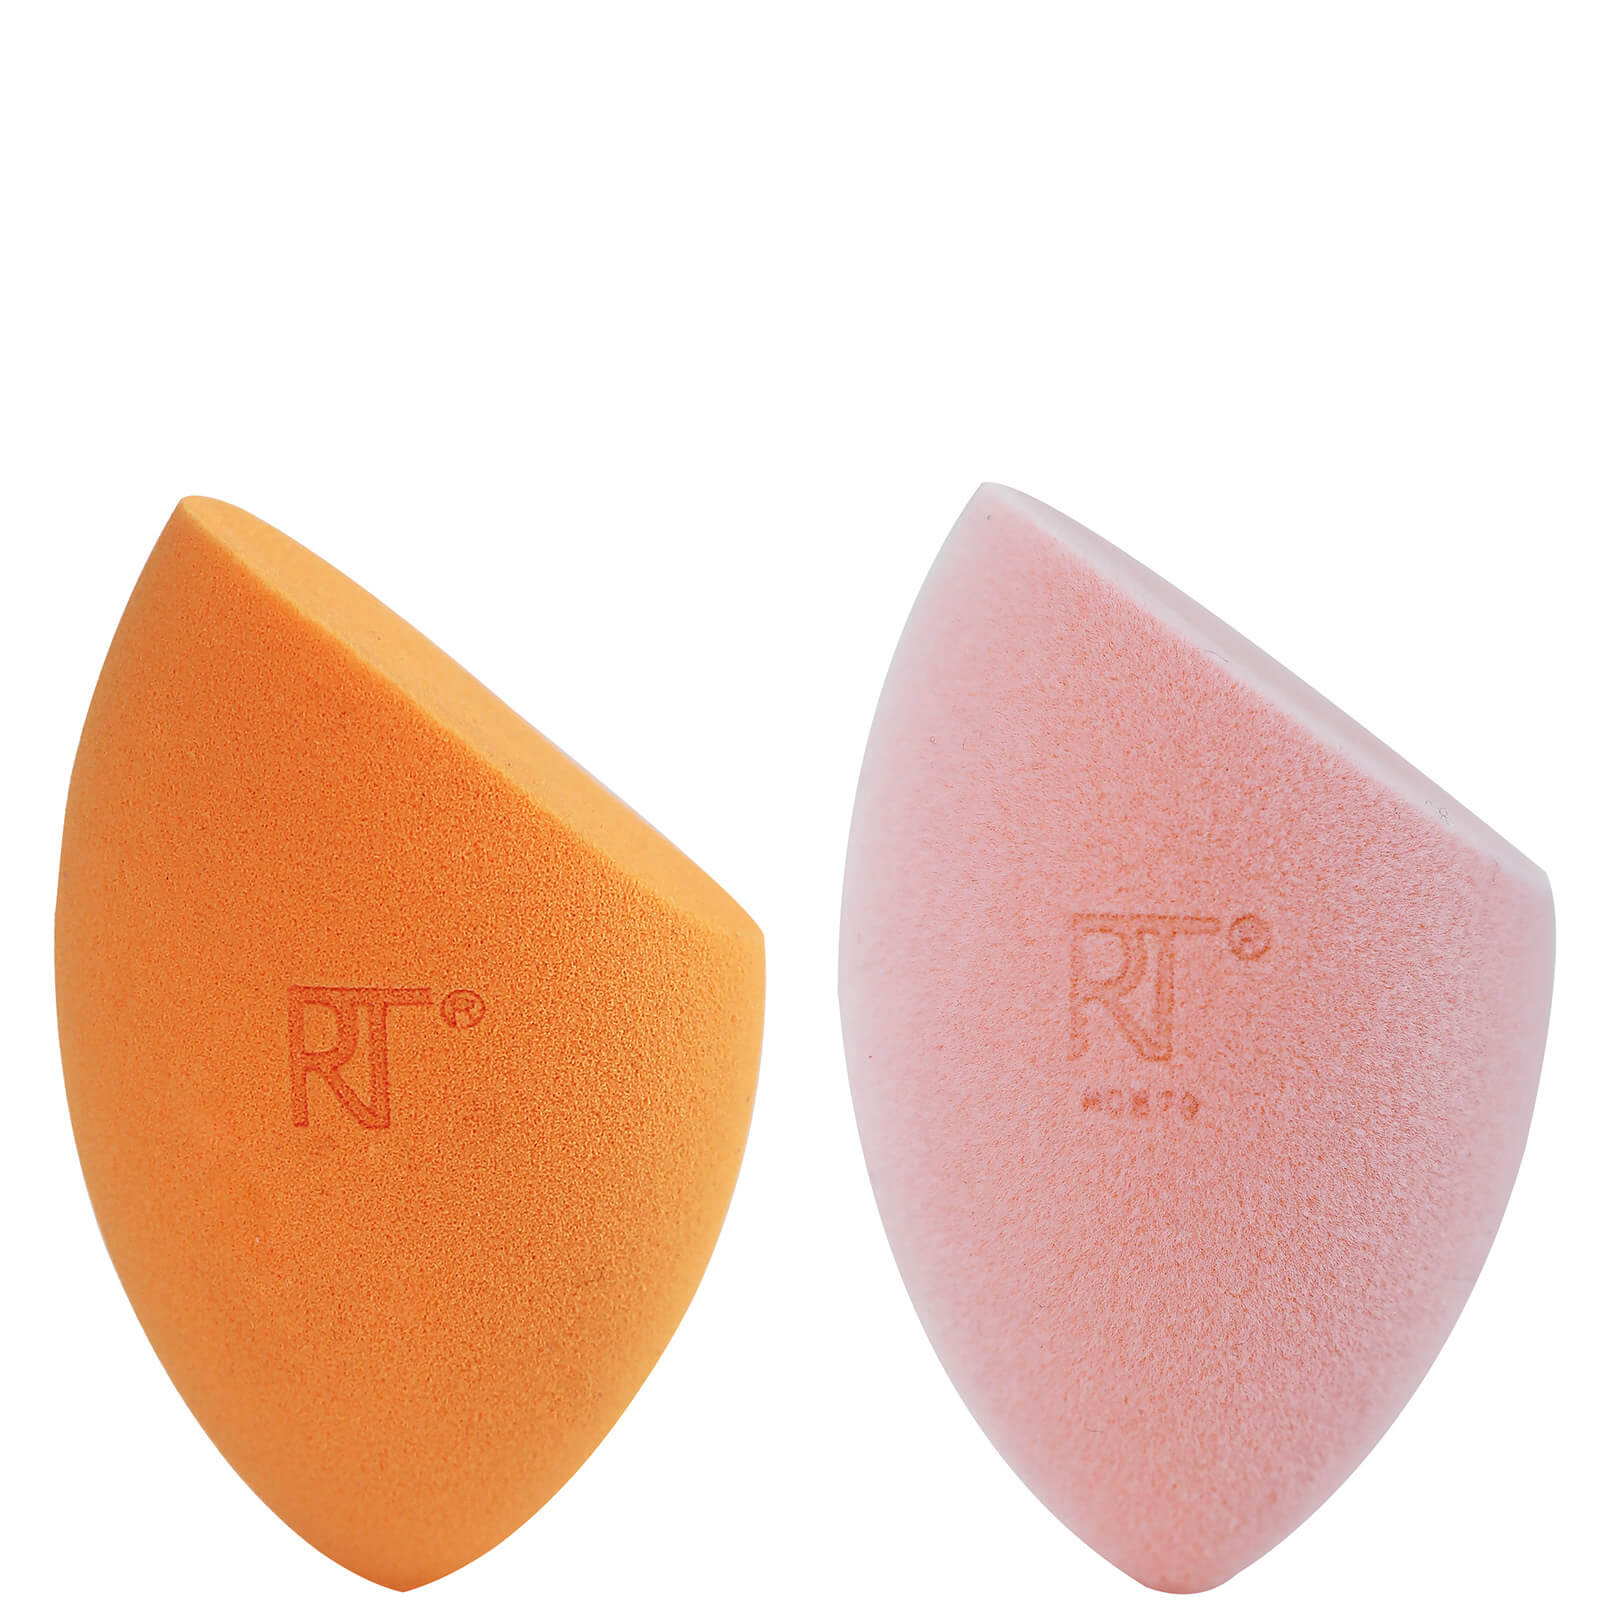 Image of Real Techniques Miracle Complexion Sponge and Miracle Powder Sponge